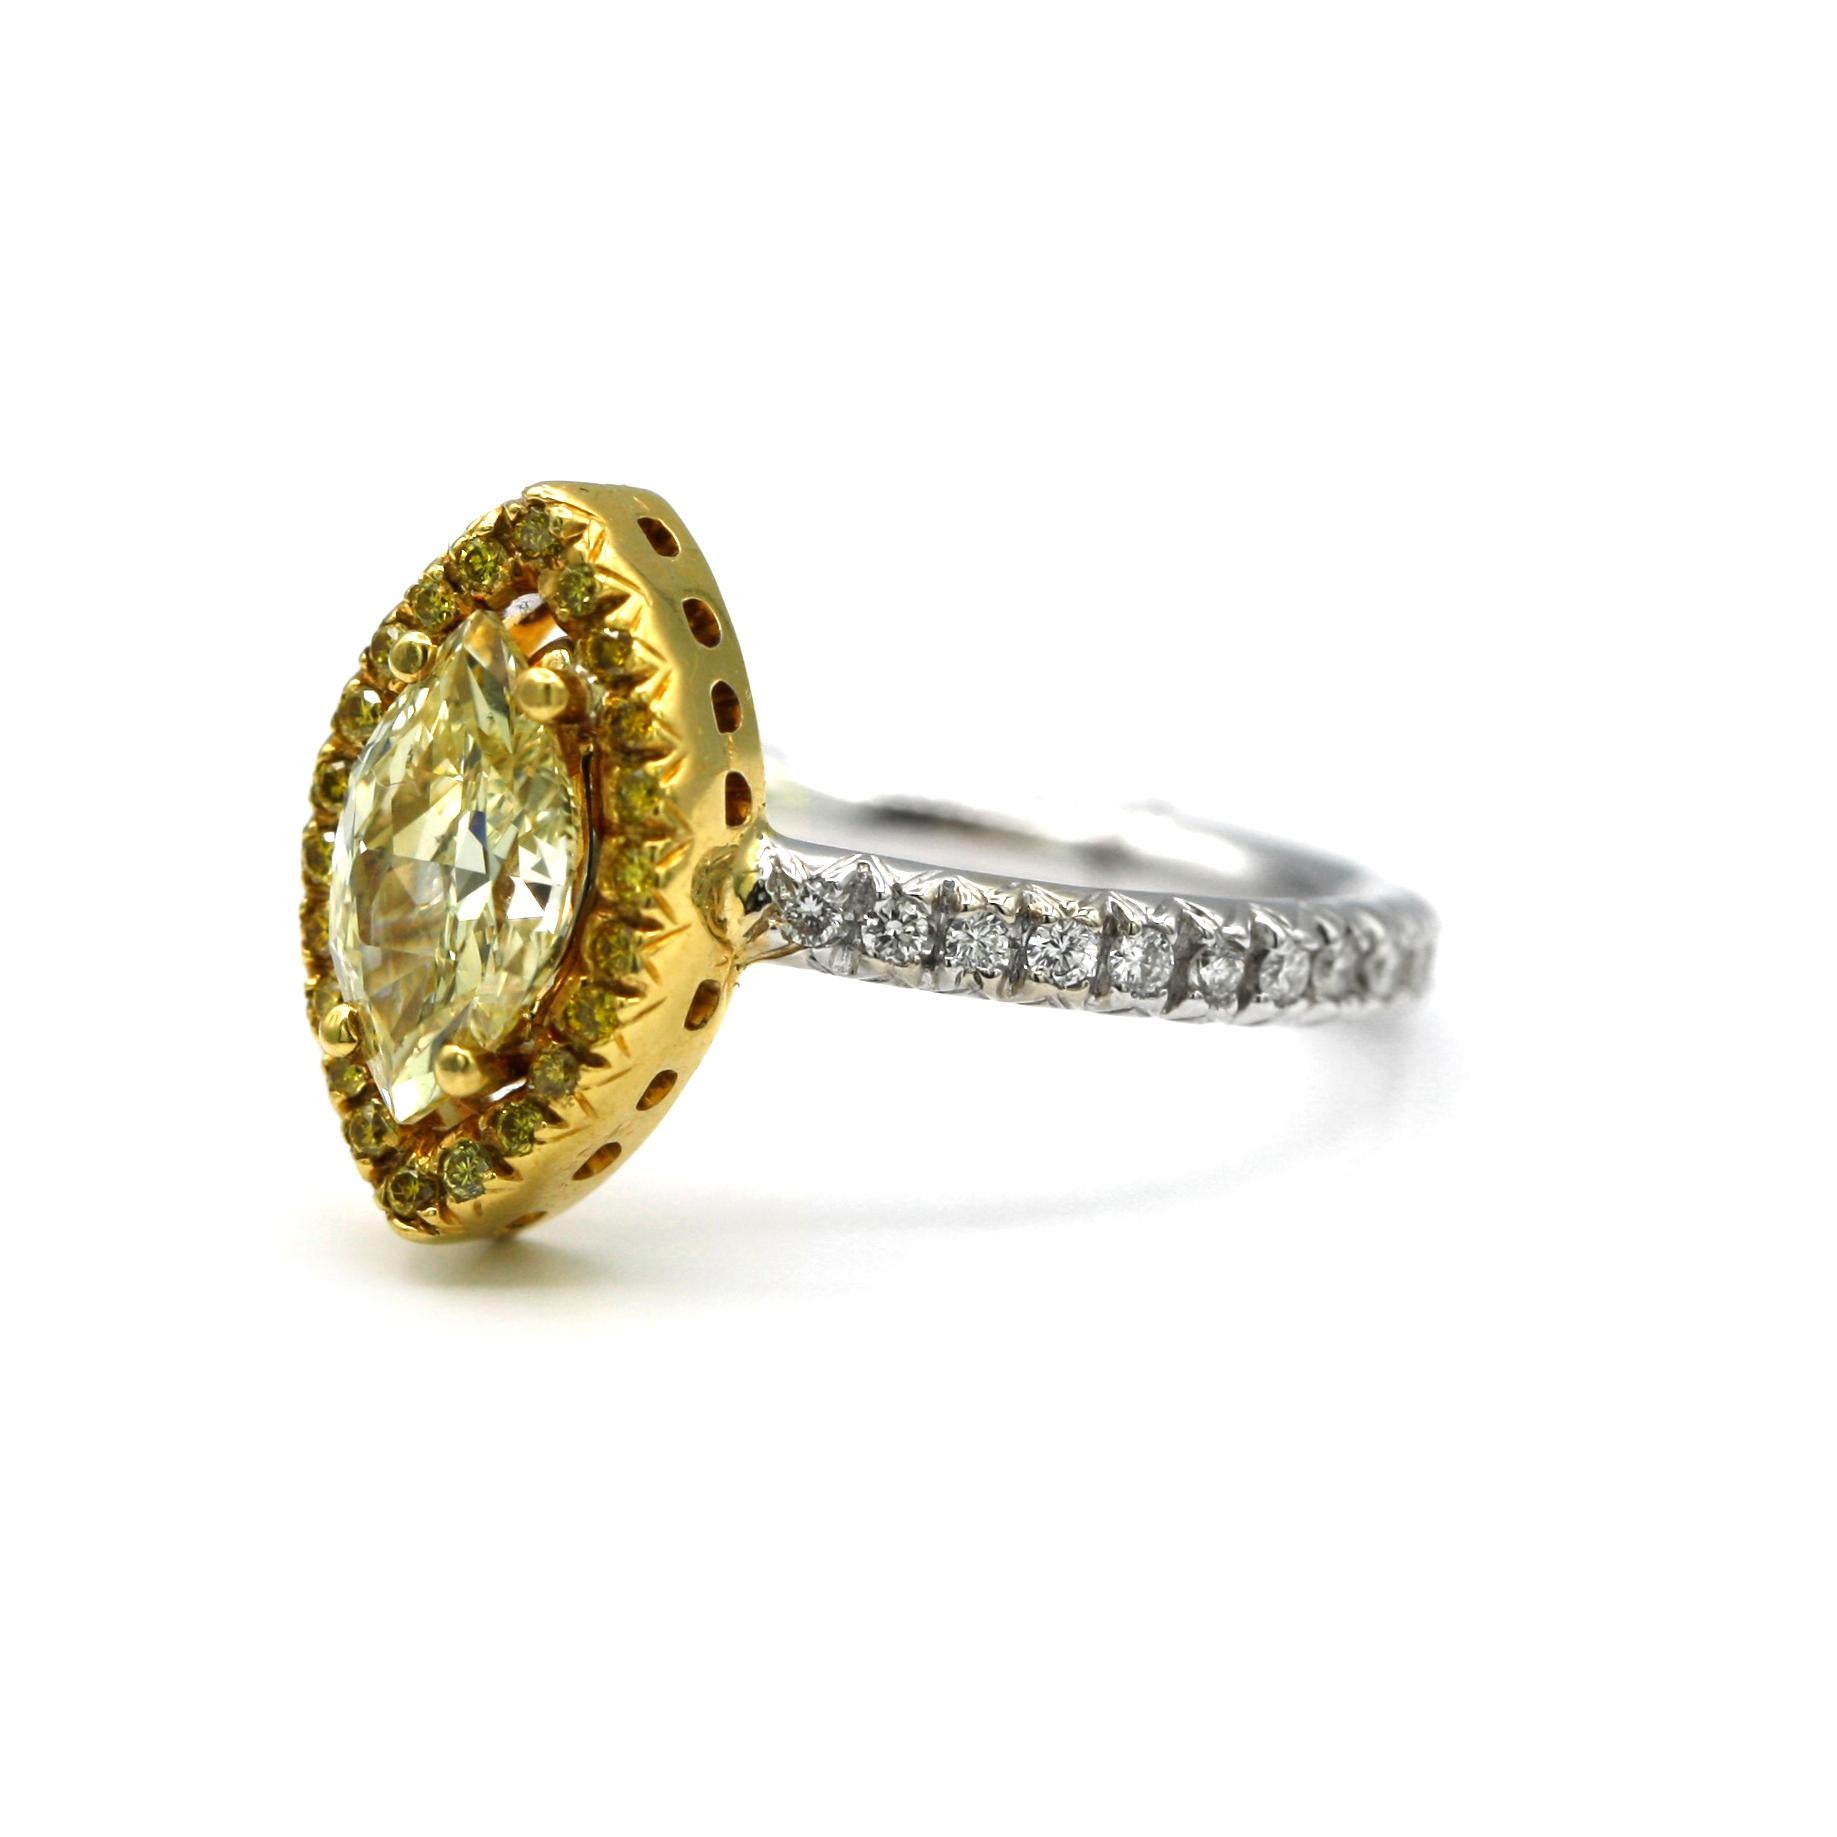 This 18 Karat gold ring features a 1.01 carat marquise shape yellow diamond (GIA certificate # 510237096) with W-X color and SI1 clarity.
The center diamond is surrounded by 22 yellow diamonds with a weight of 0.26 carats and 35 white diamonds with